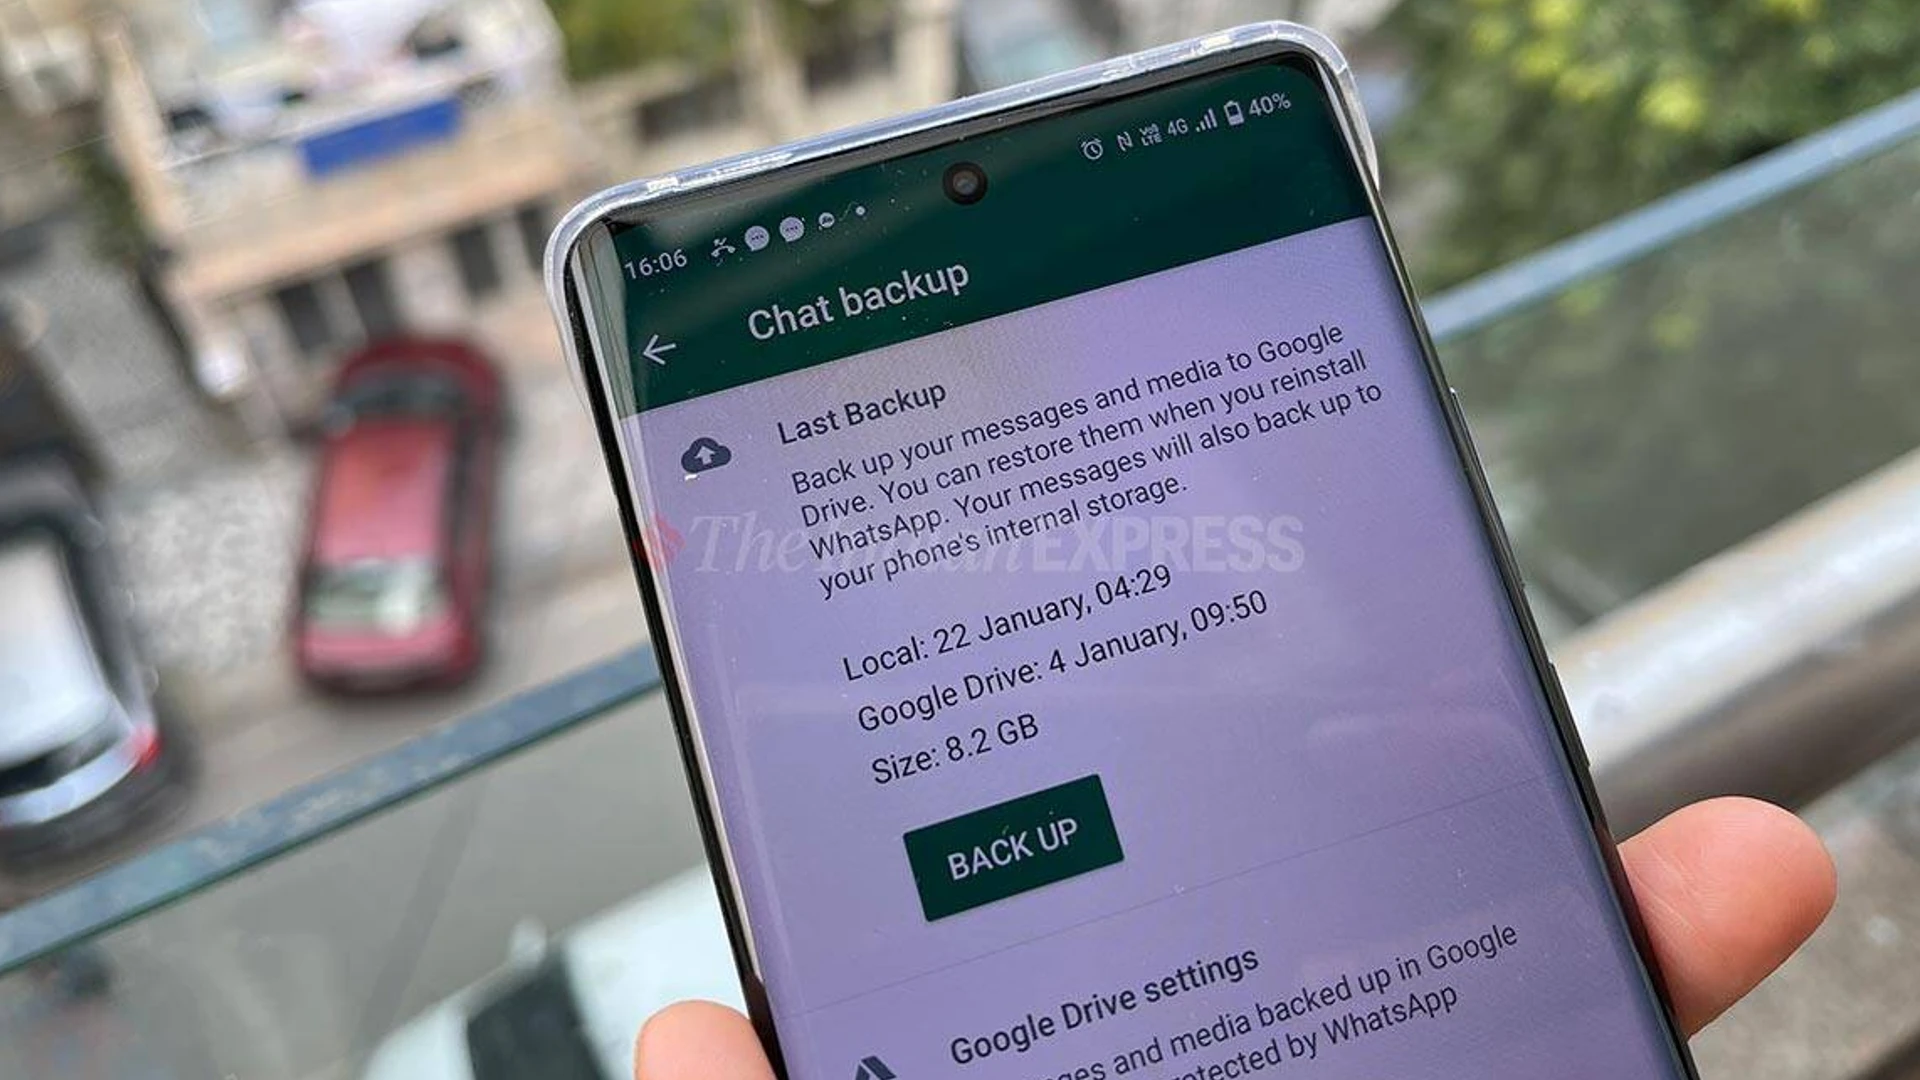 Will Google Drive stop offering unlimited storage for Whatsapp backups? Check This Out.